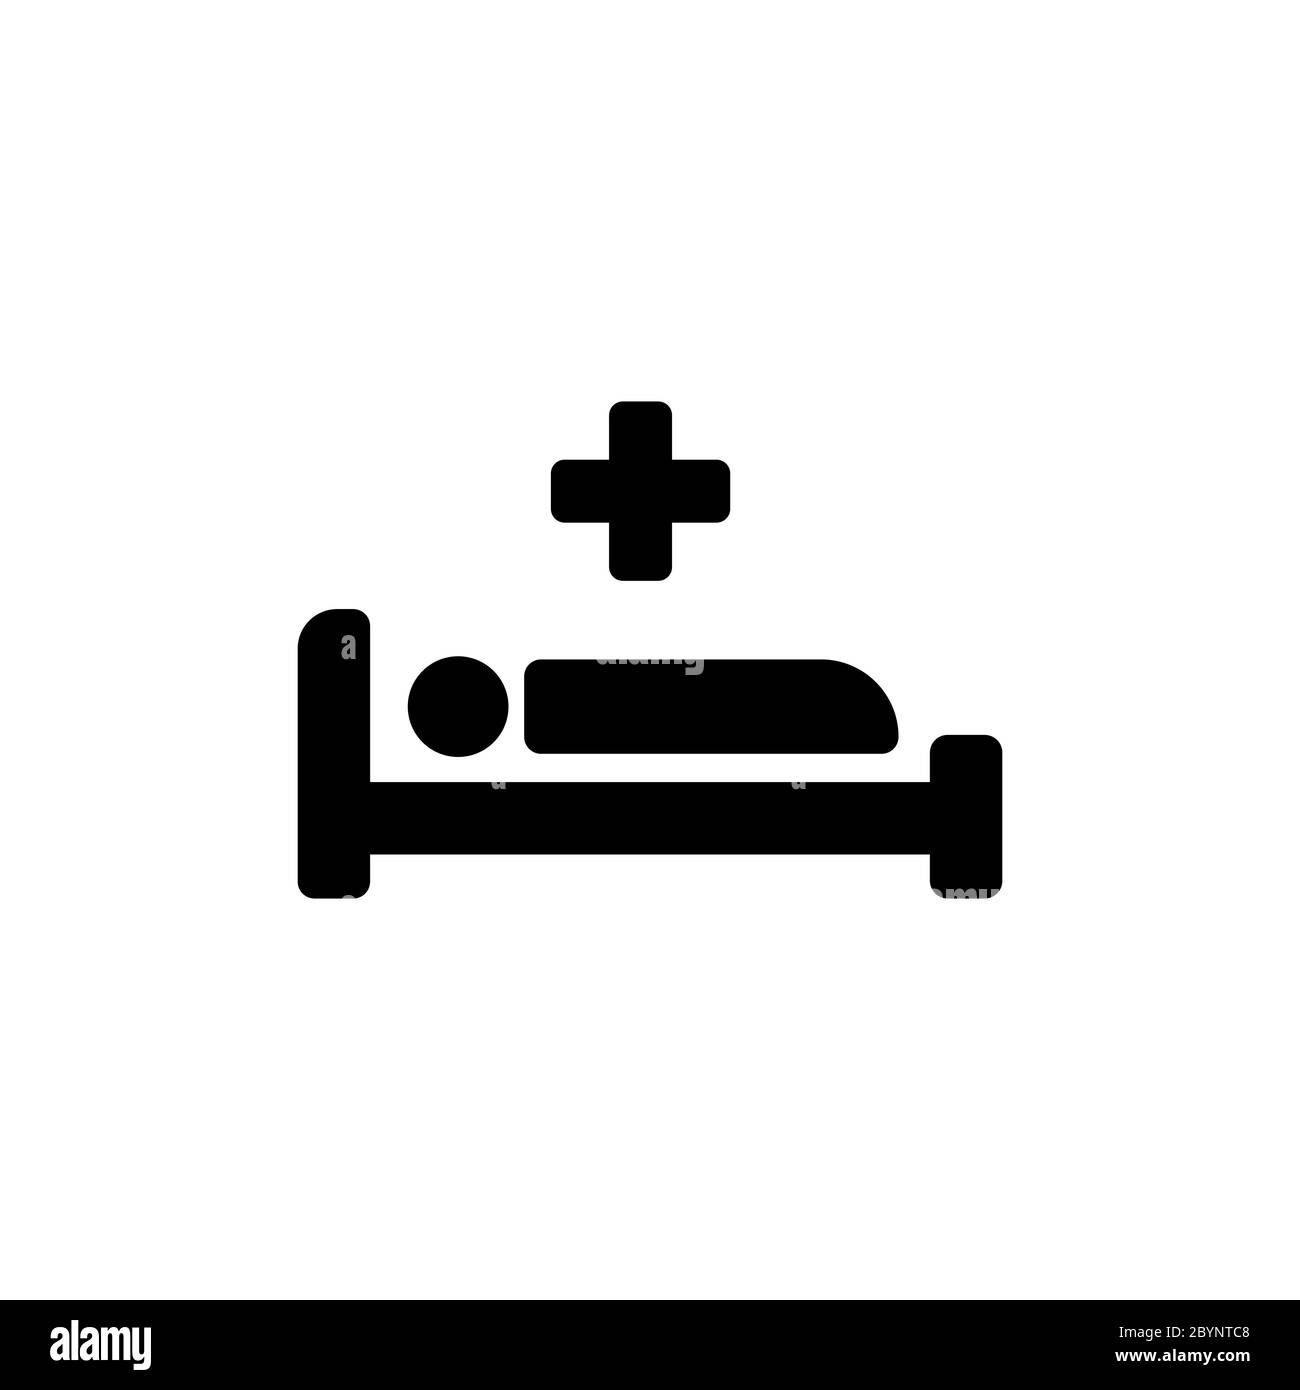 Hospital bed and cross icon on isolated white background. EPS 10 vector. Stock Vector